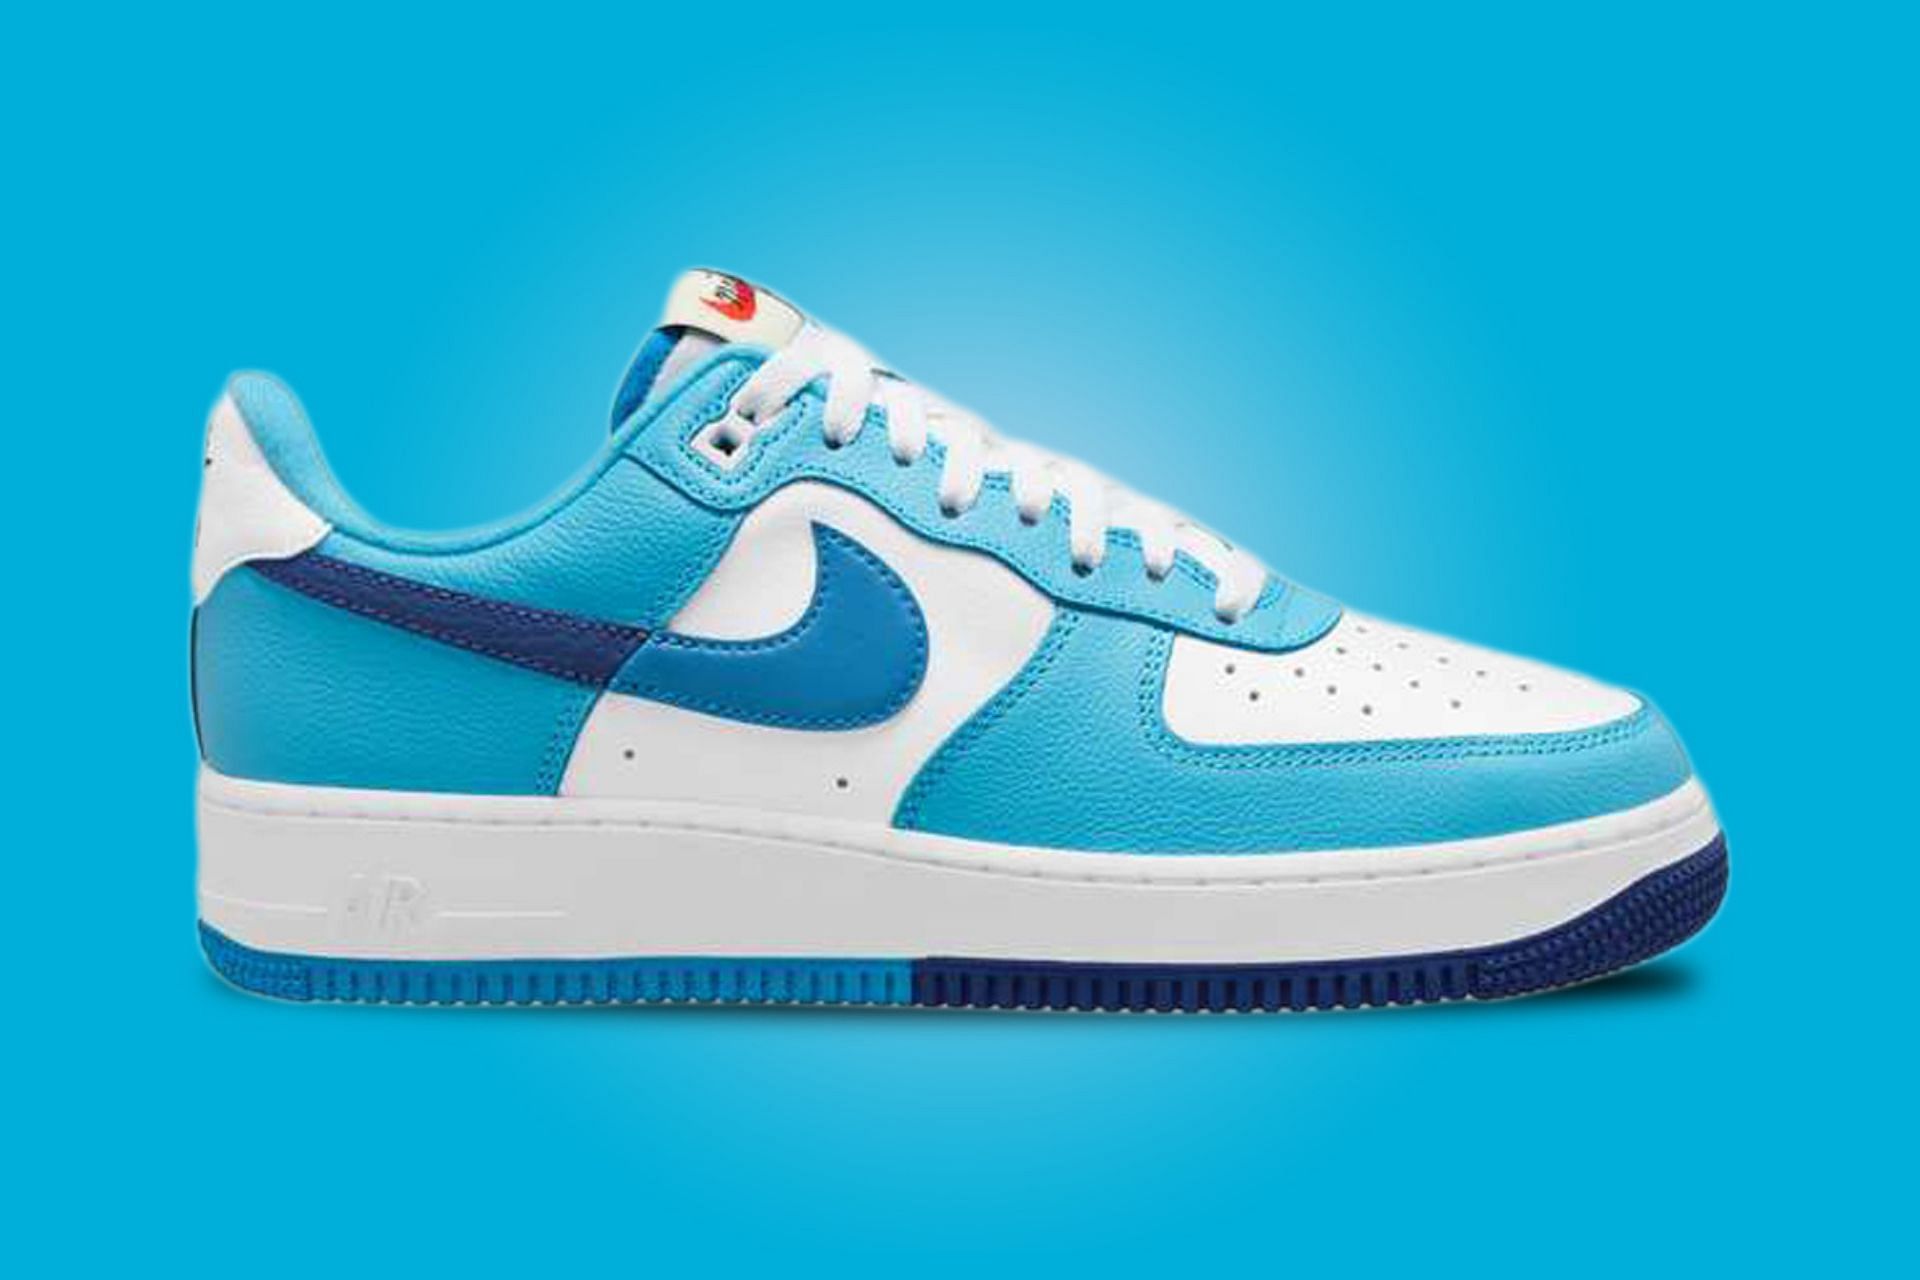 Take a closer look at the upcoming AF1 low shoes (Image via Nike)